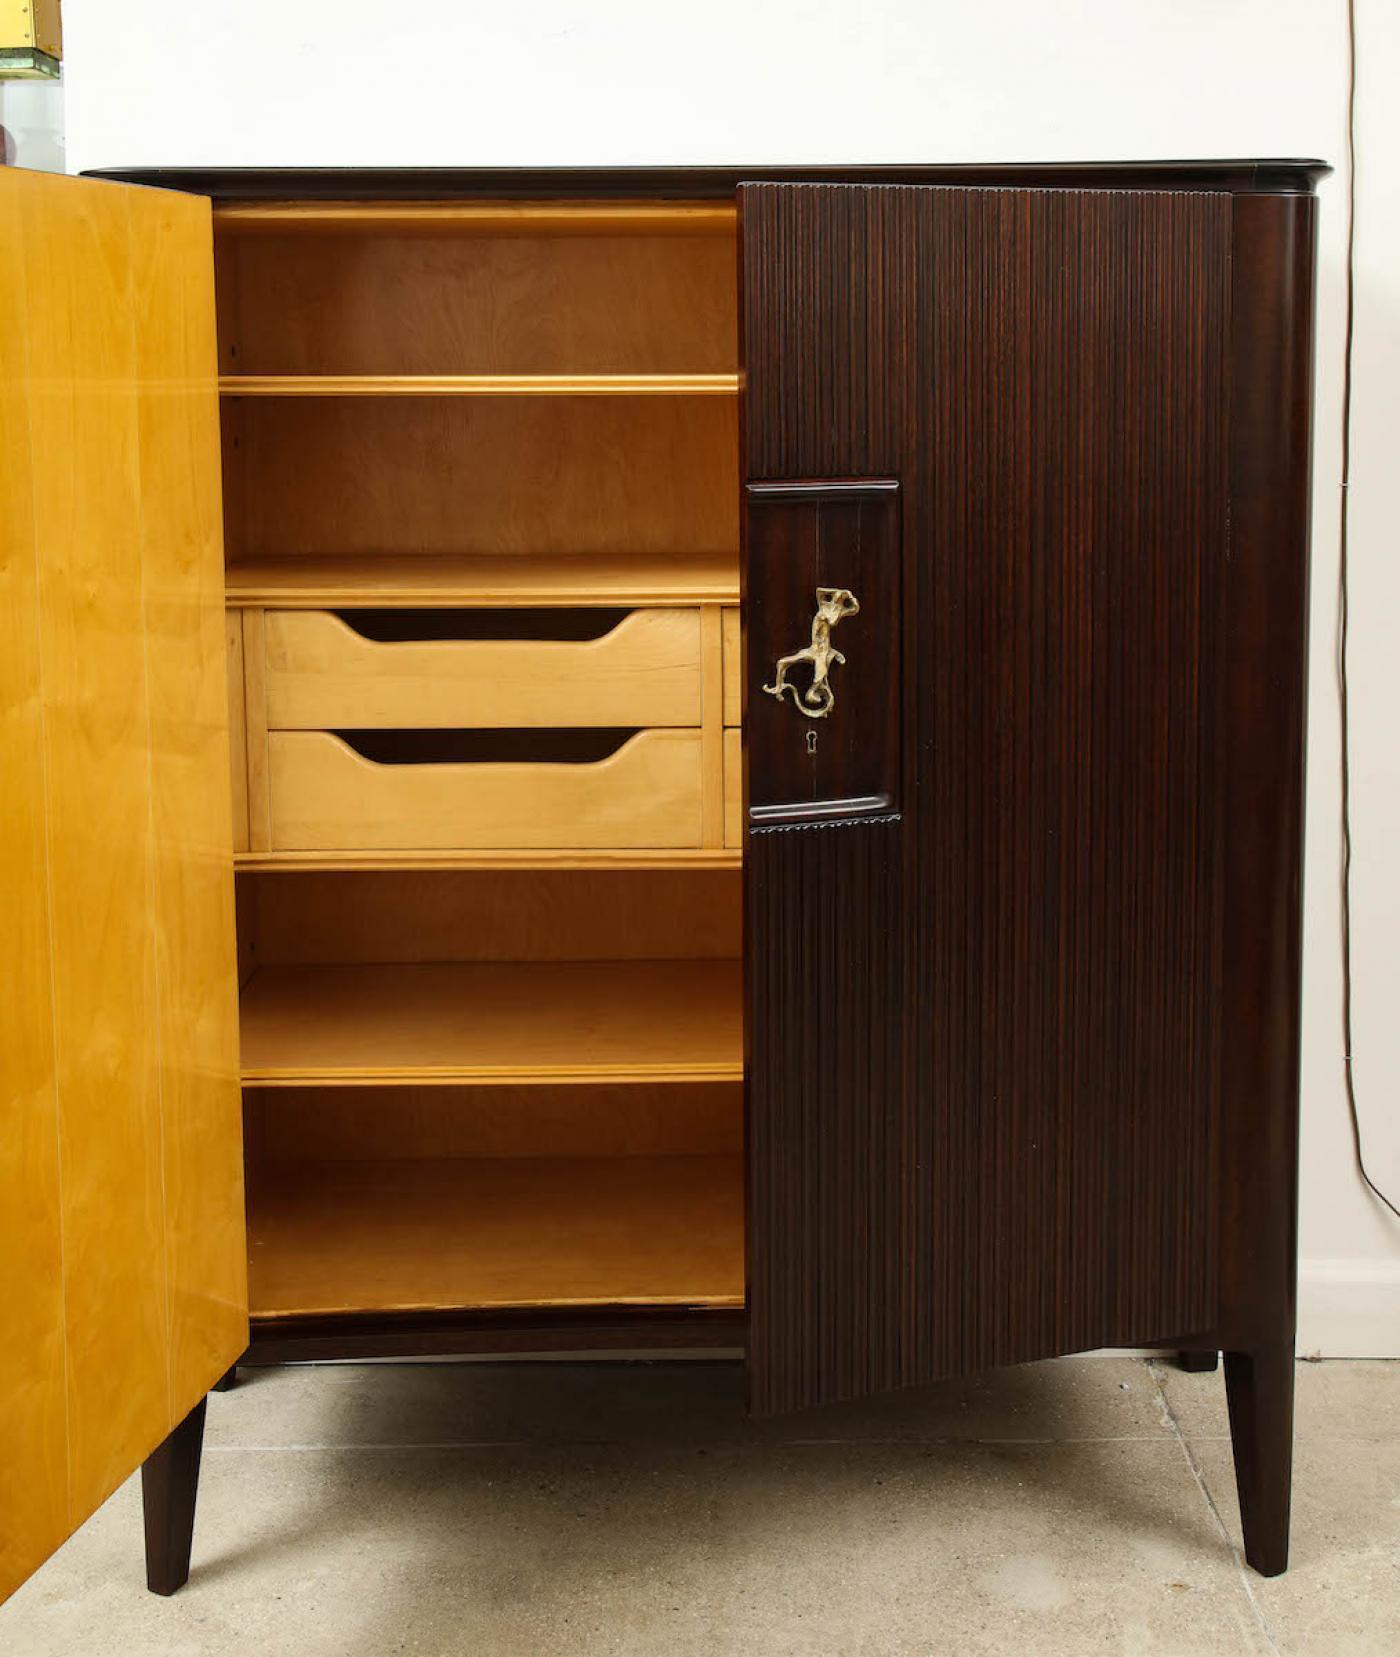 2-Door Cabinet by Osvaldo Borsani & Lucio Fontana for ABV.  Mahogany, bronze, maple, back-painted glass. Dark stained mahogany with fluted door-fronts & inset dark glass top. Interior of bleached wood with adjustable shelving and 4 drawers. Cast